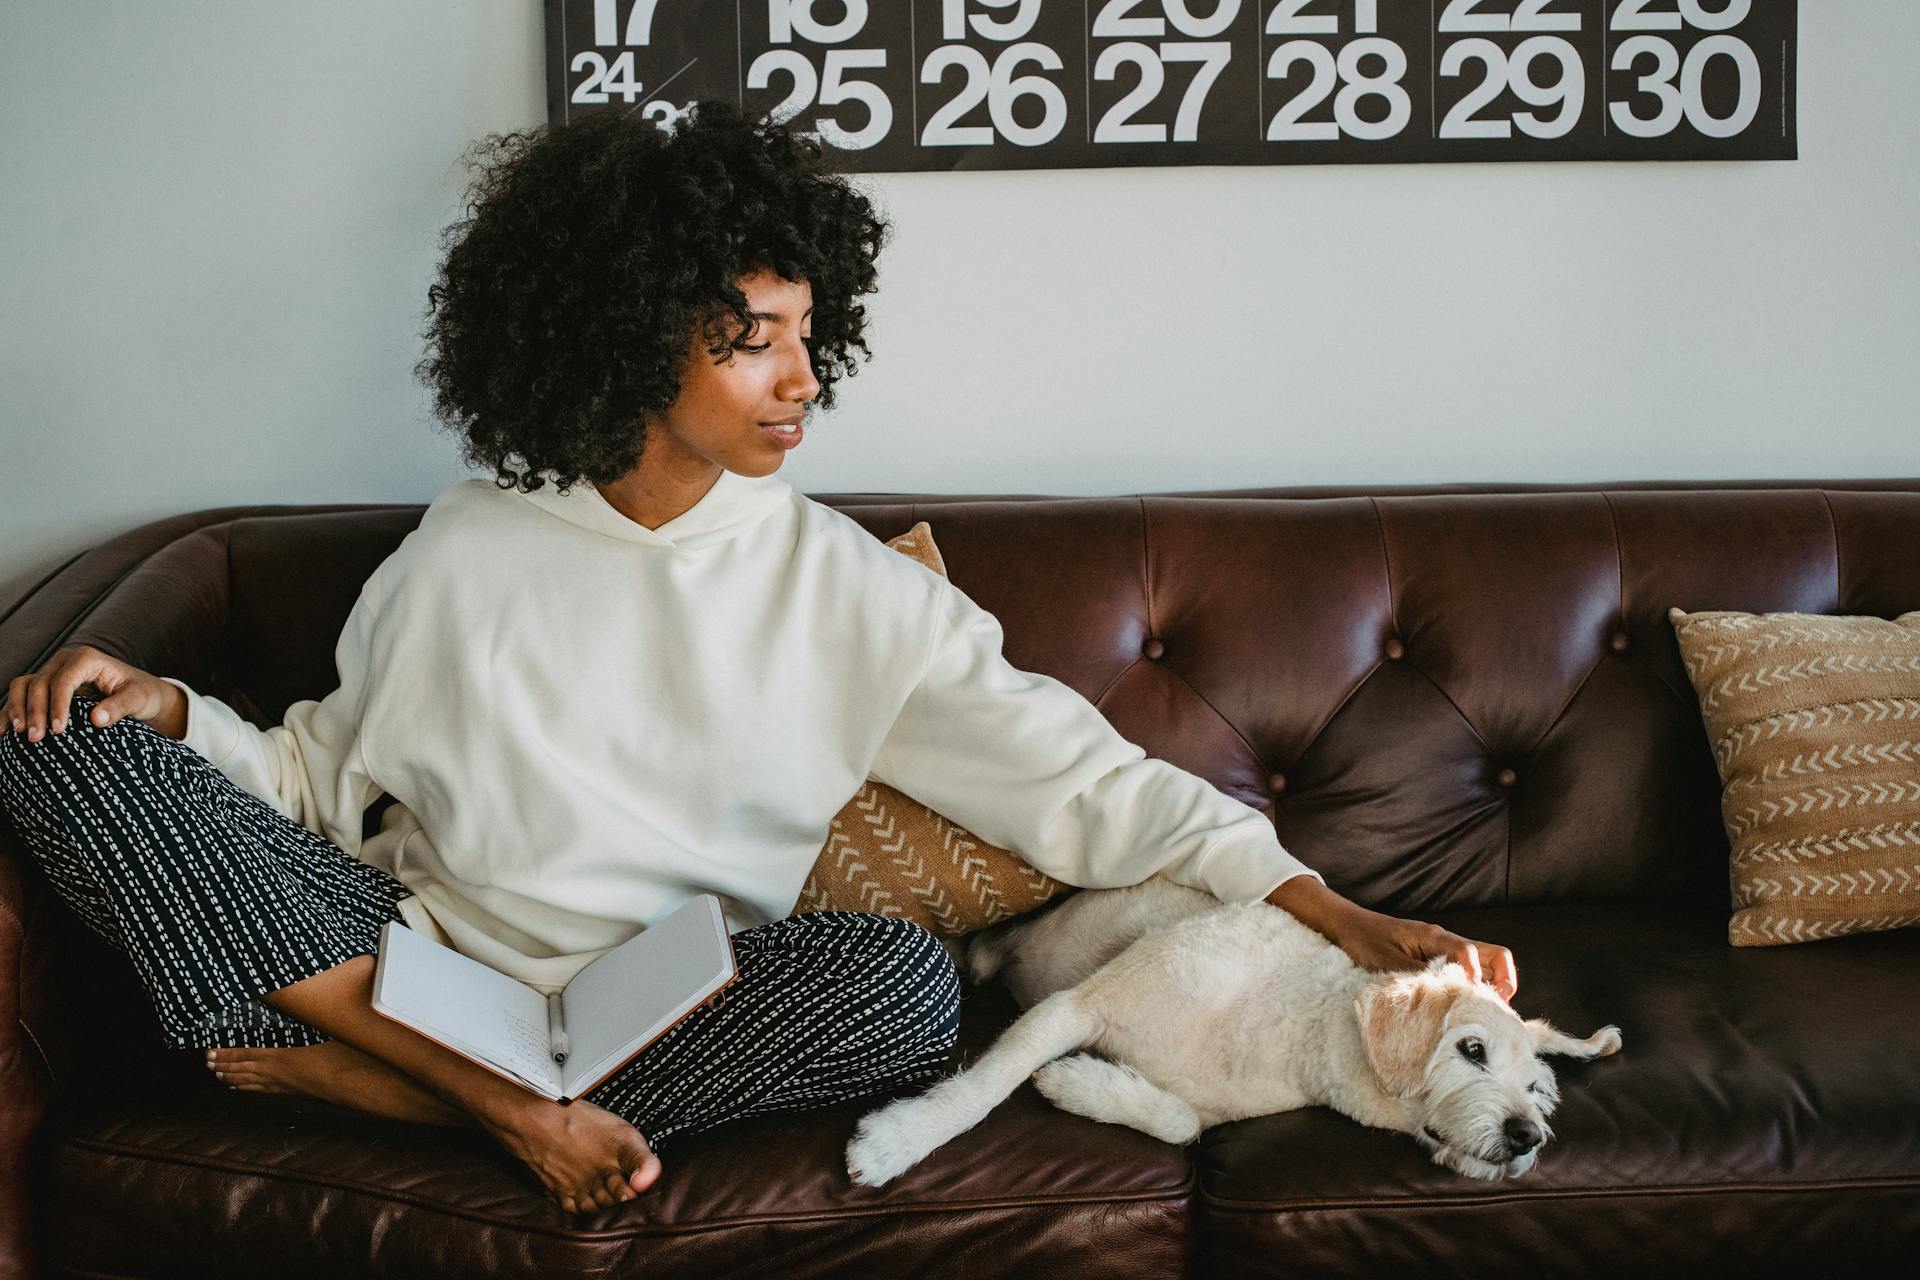 Stylish young ethnic lady reading notes and stroking cute dog on couch